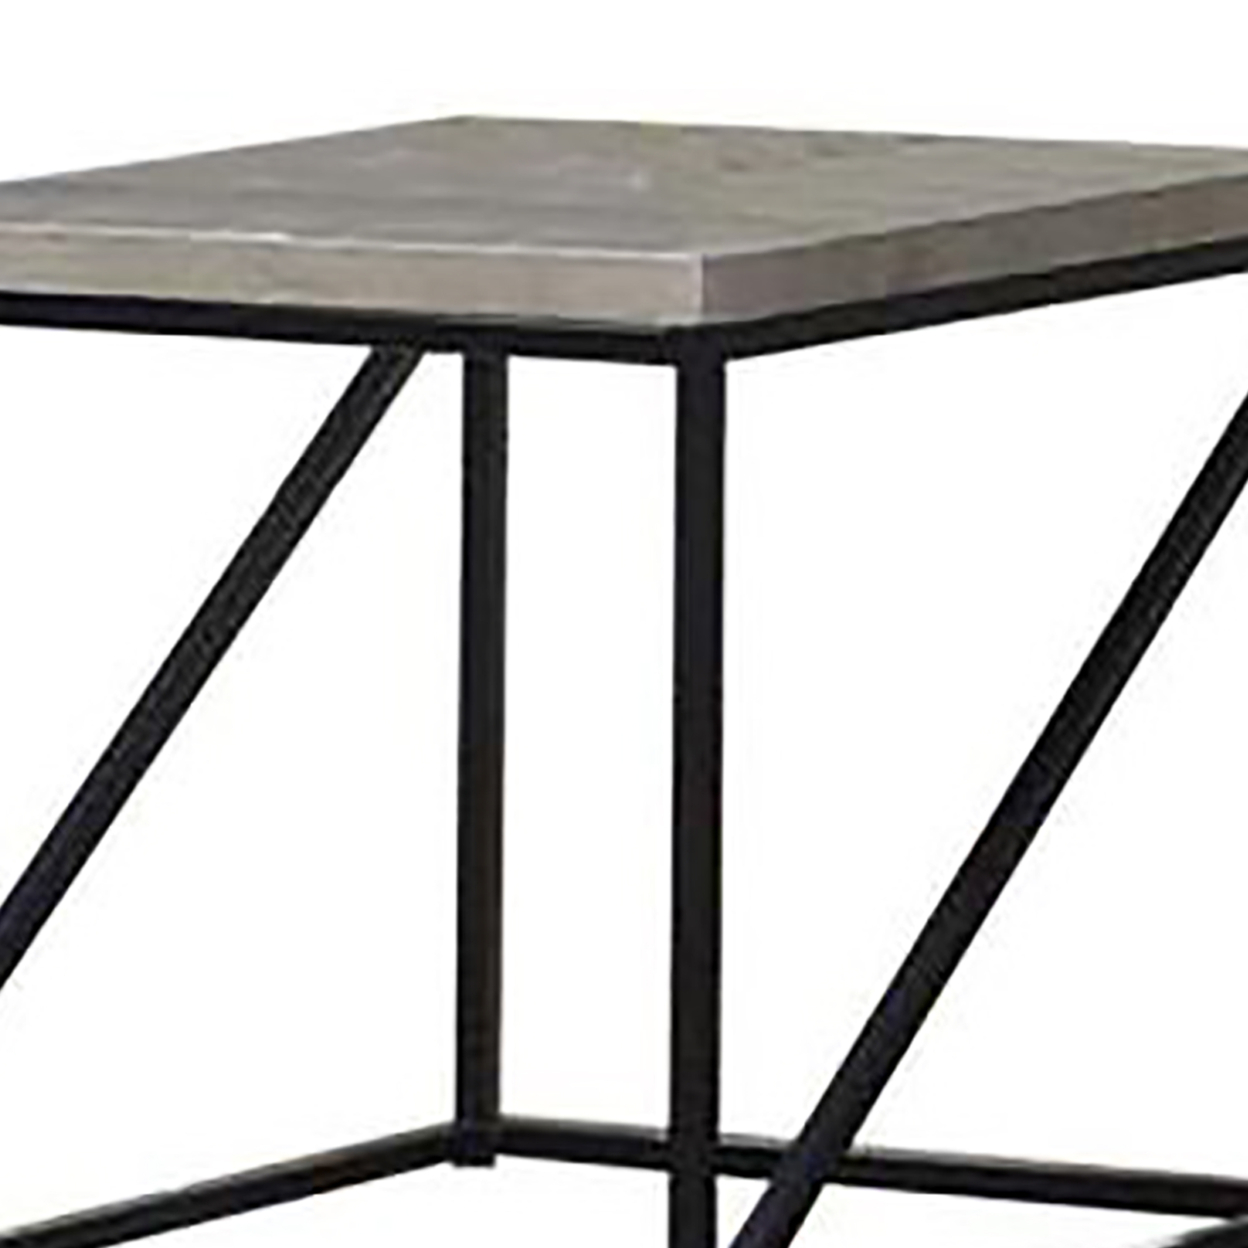 Industrial Style Minimal End Table With Wooden Top And Metallic Base, Gray- Saltoro Sherpi